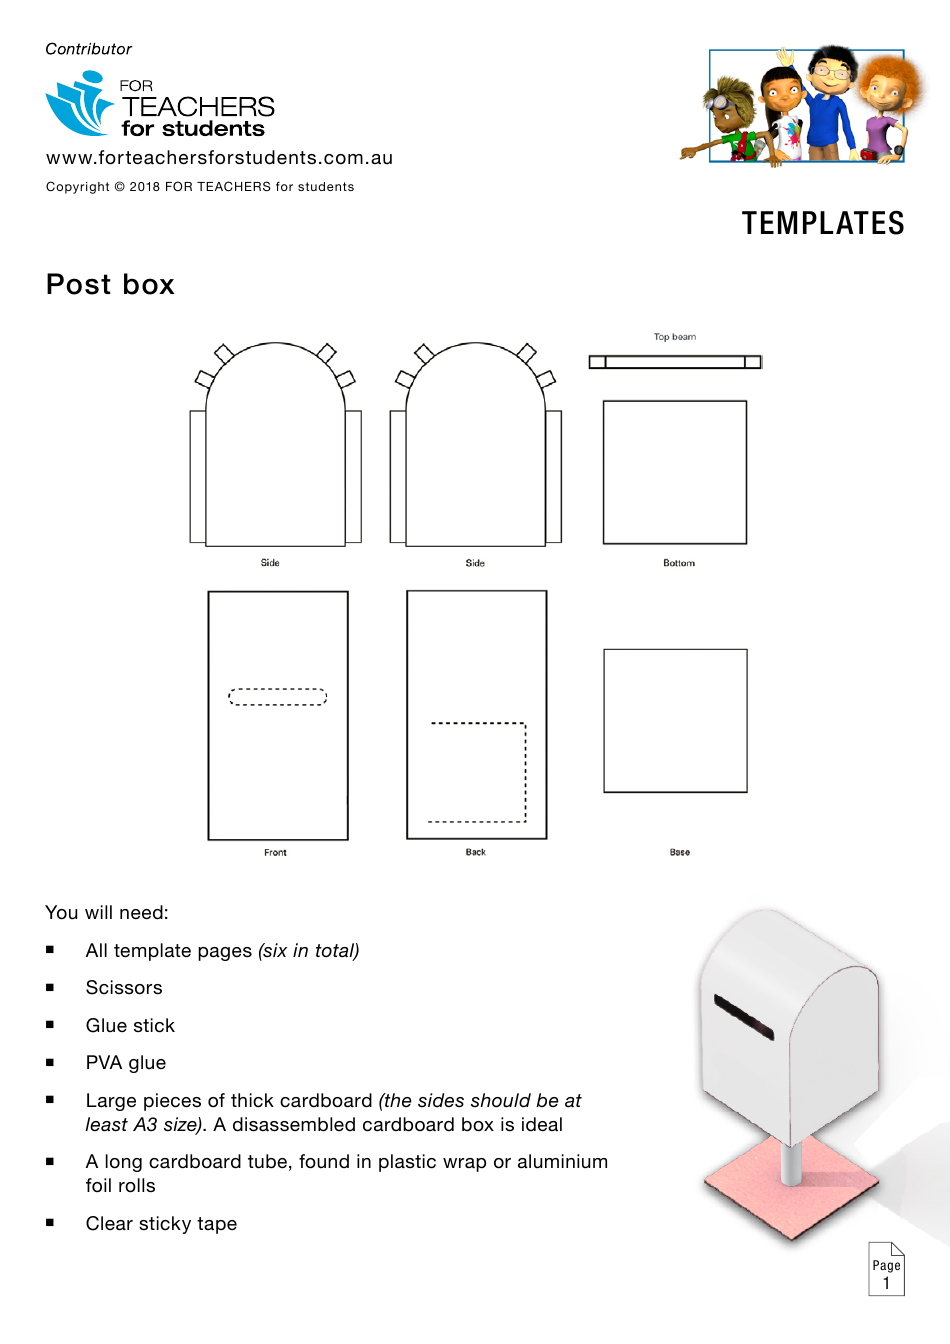 Post Box Template for Teachers and Students